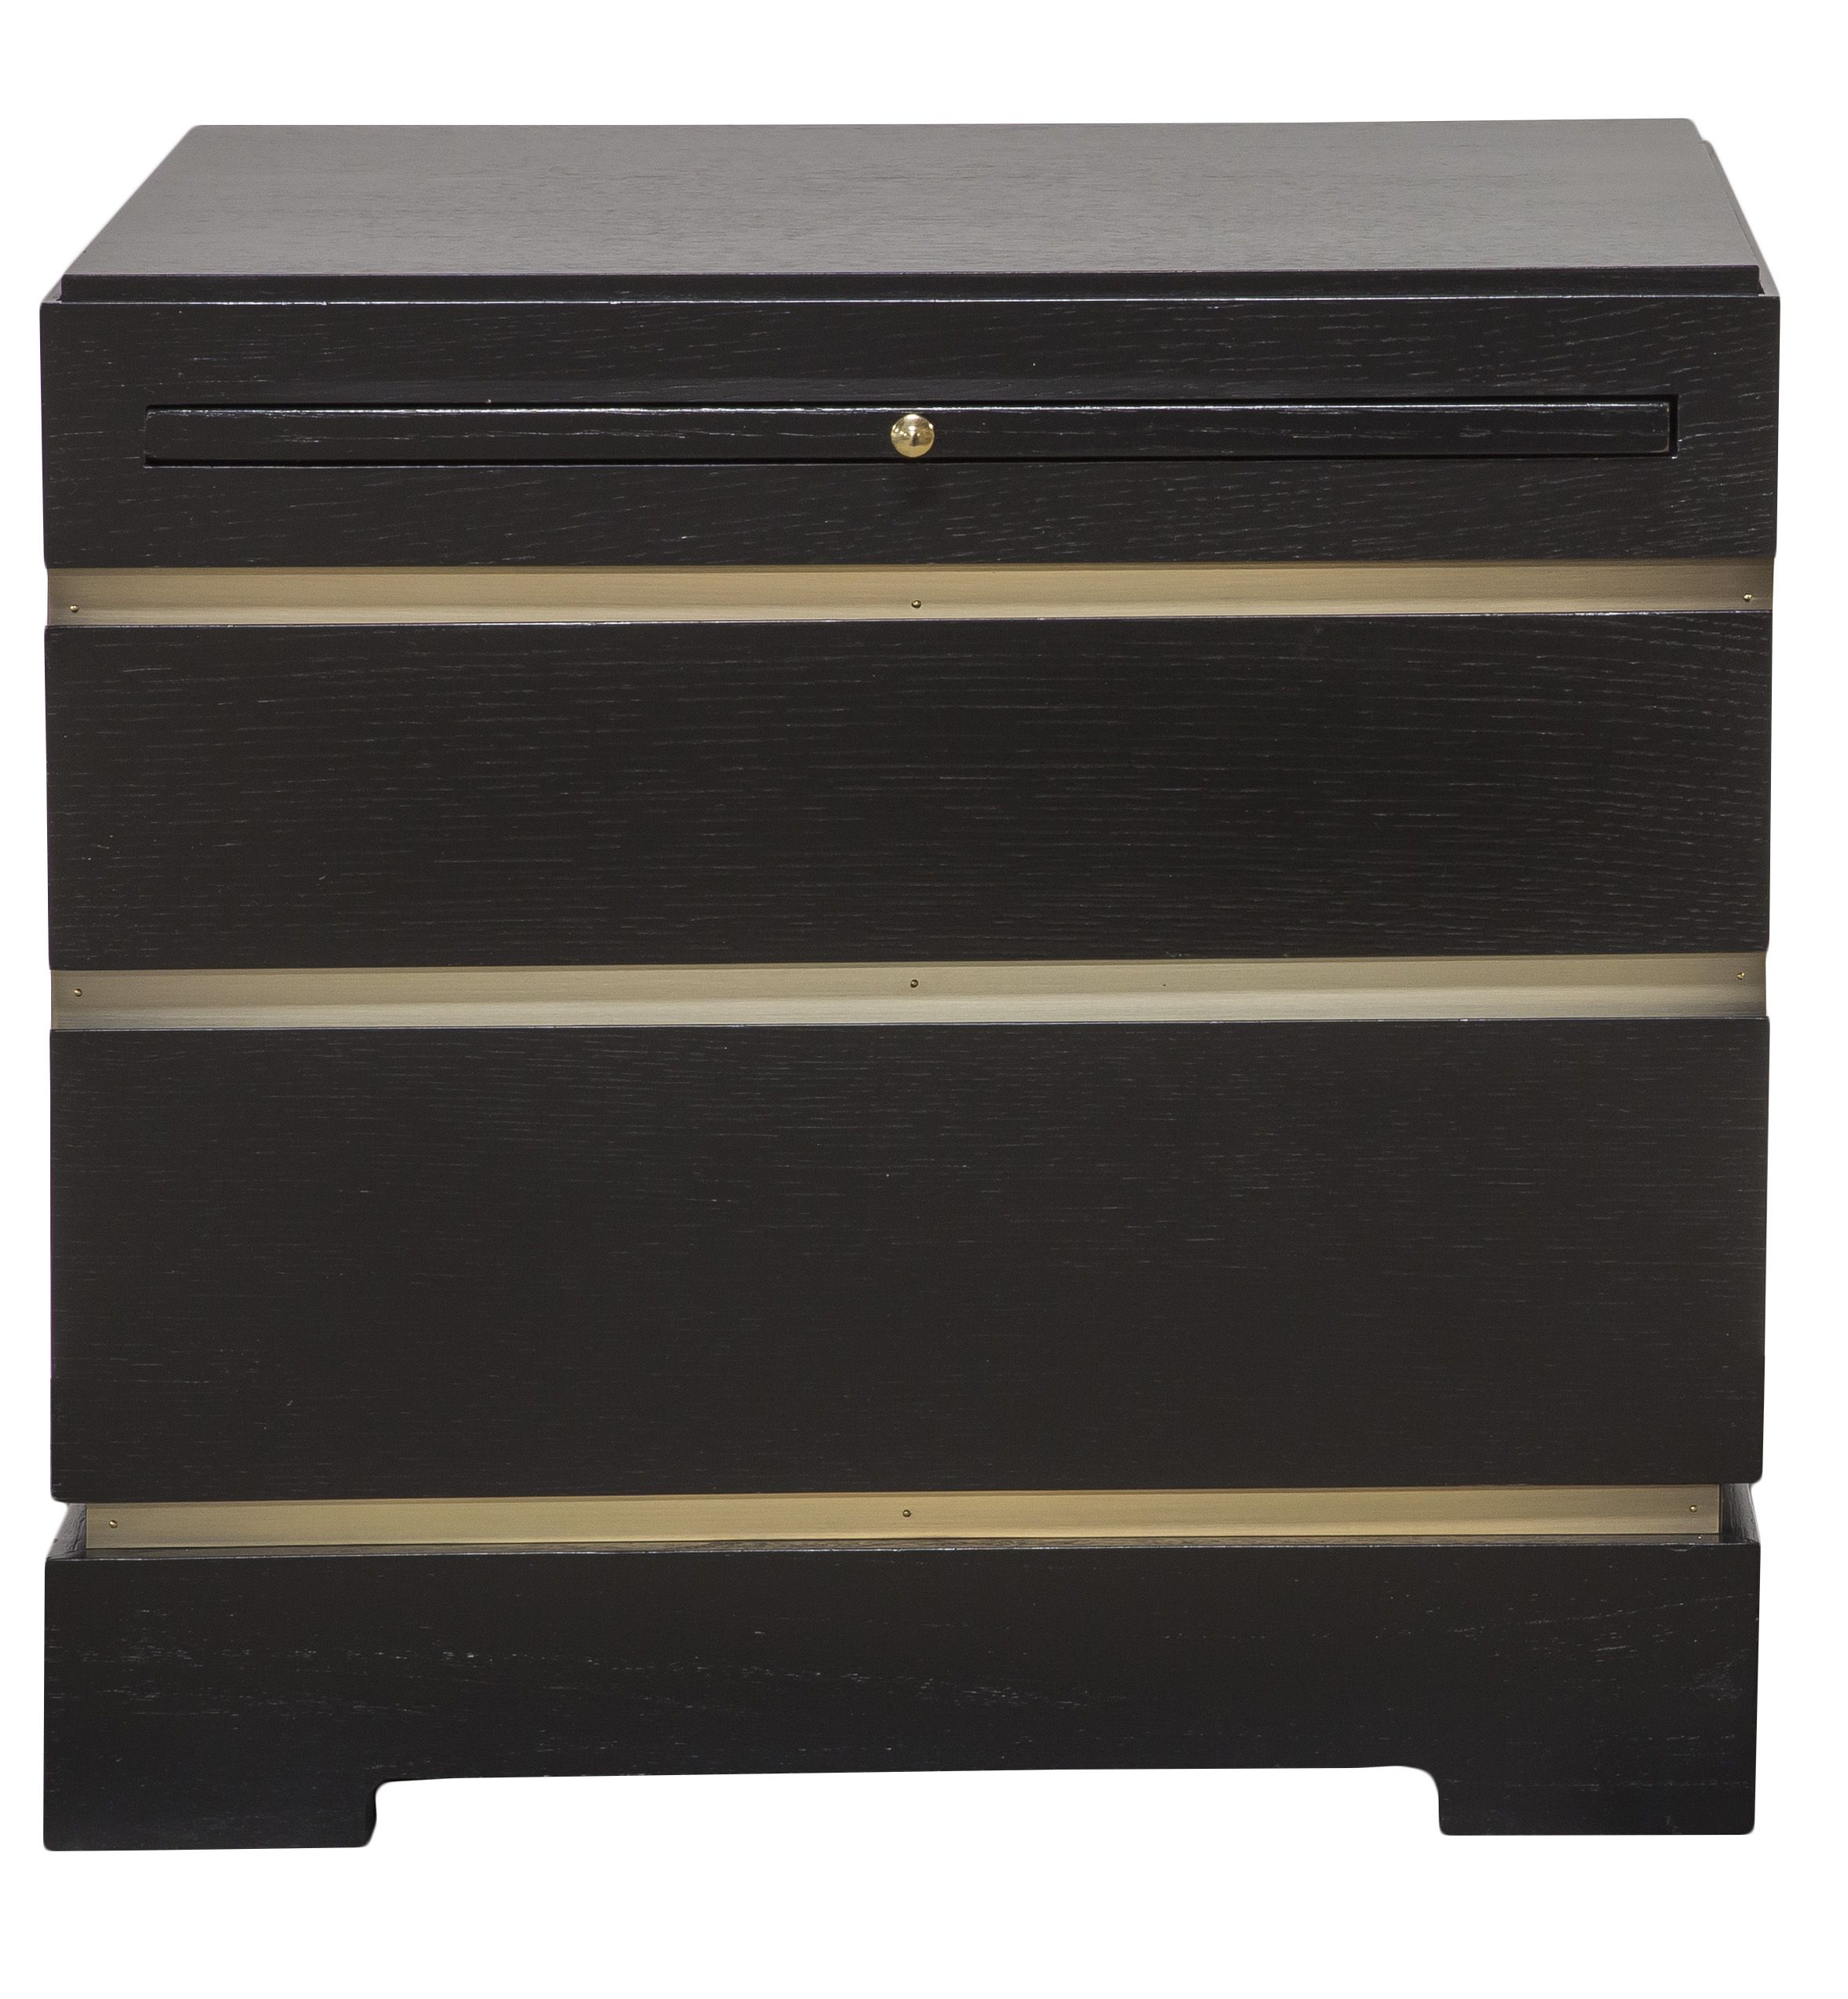 Cortland Side Table 9723e – Our Products – Vanguard Furniture Pertaining To Wendell Sideboards (View 26 of 30)